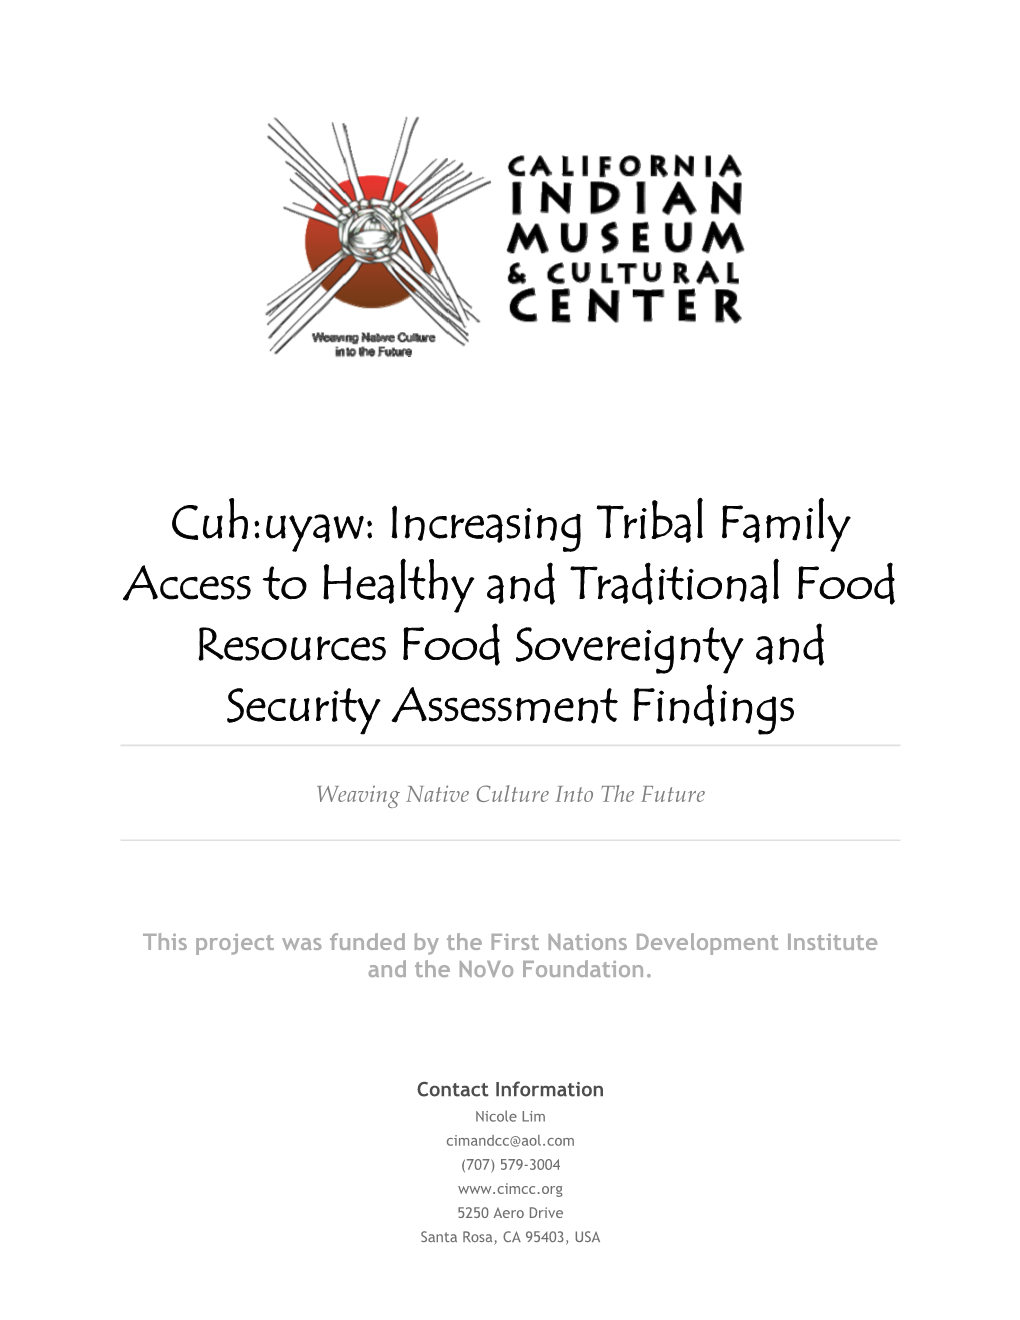 Cuh:Uyaw: Increasing Tribal Family Access to Healthy and Traditional Food Resources Food Sovereignty and Security Assessment Findings